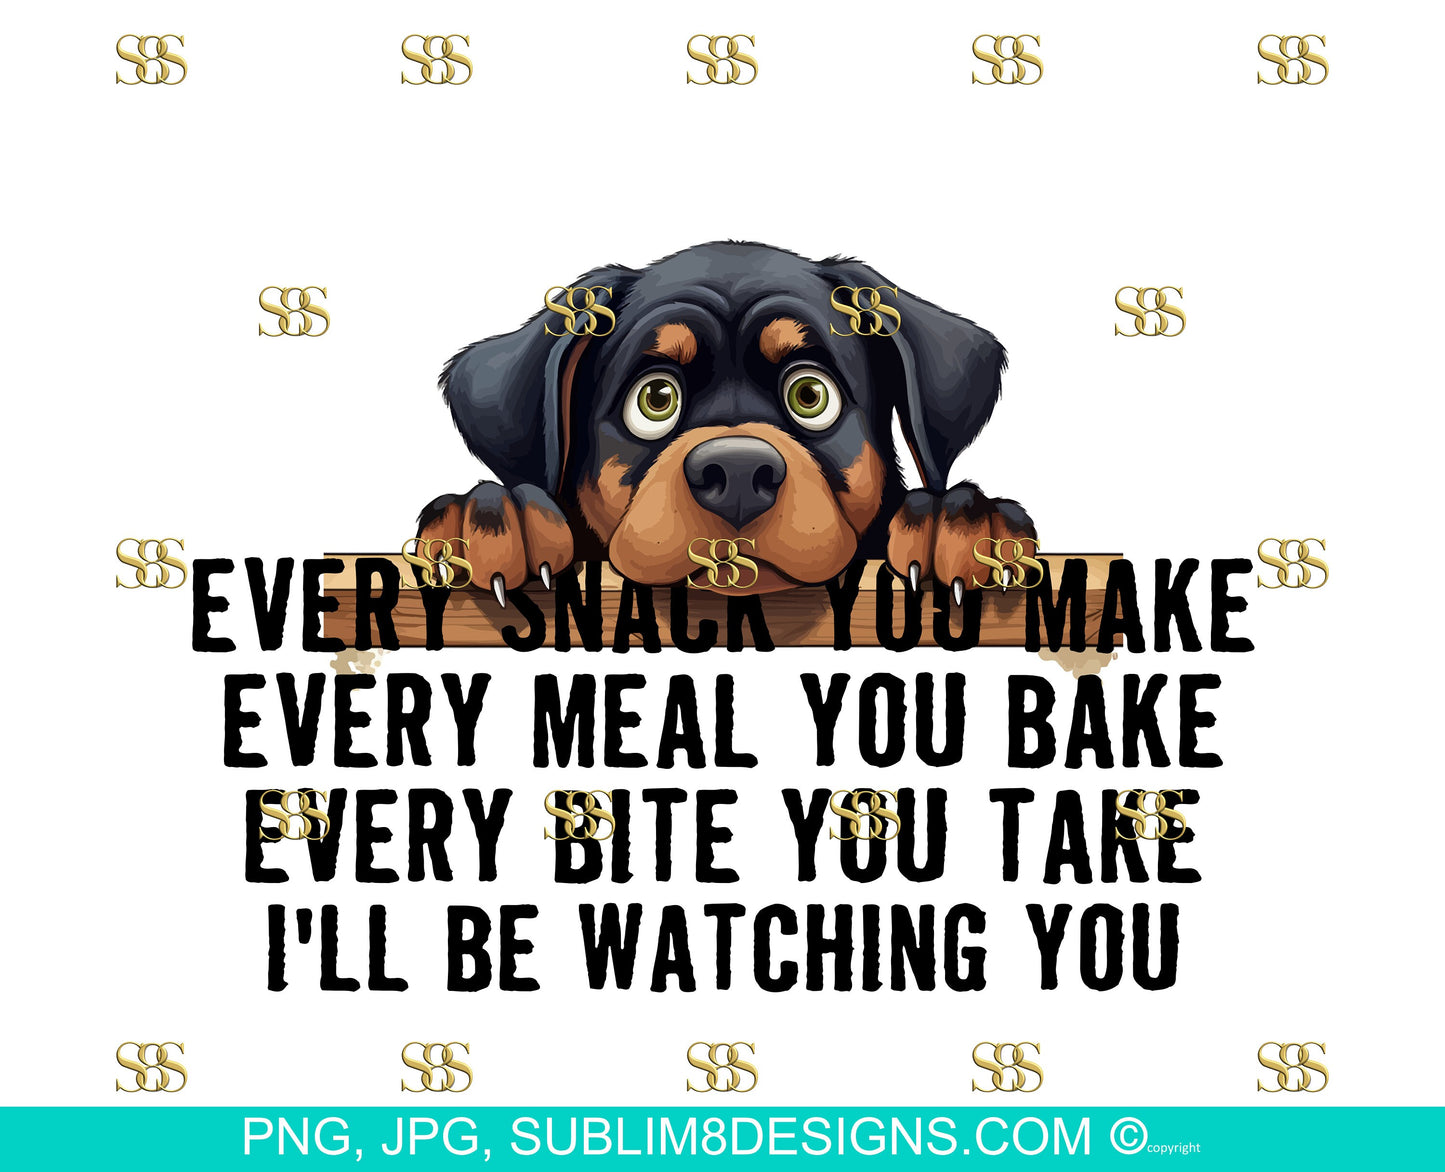 Snack-Obsessed Rottweiler: The Hilarious Table Peeker! Every Bite You Take I'll Be Watching You PNG and JPEG ONLY